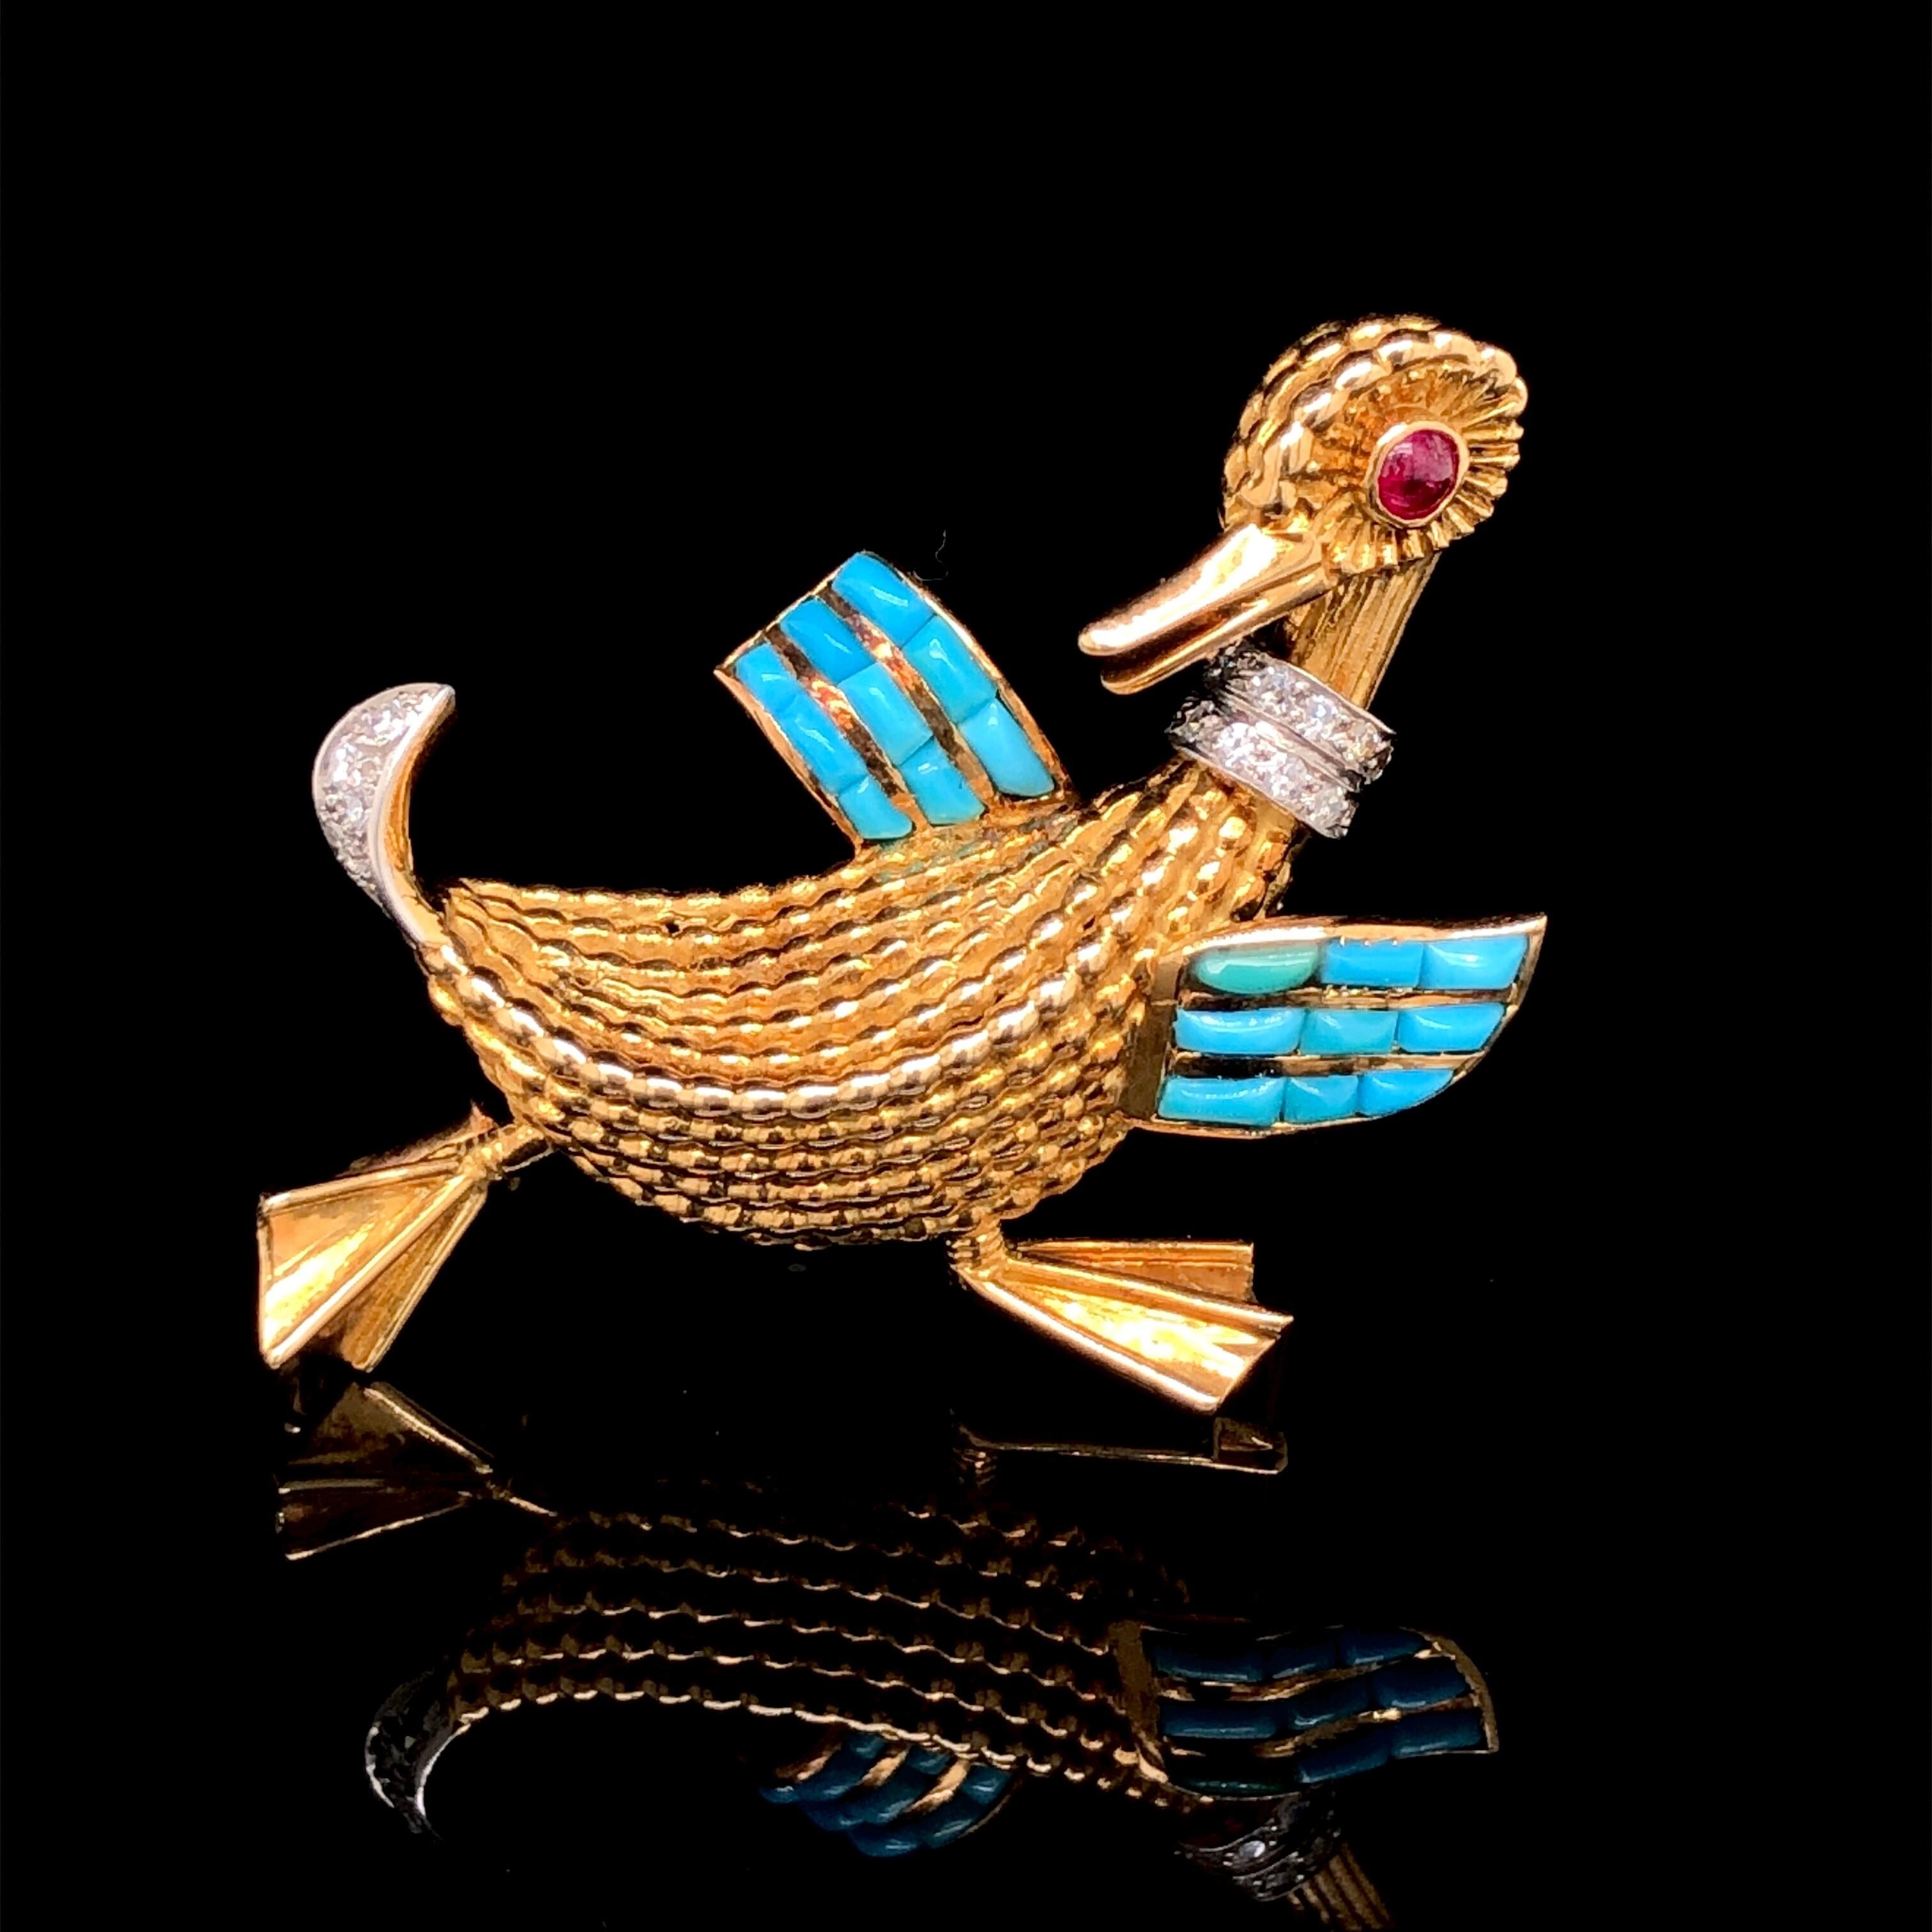 A ruby, diamond and turquoise gold duck brooch, ca. 1960s, Boucheron, France.

The whimsical duck brooch is beautifully adorned with a ruby cabochon eye, buffed turquoise wings and round brilliant cut diamonds and gold wire feathers. It is very fine